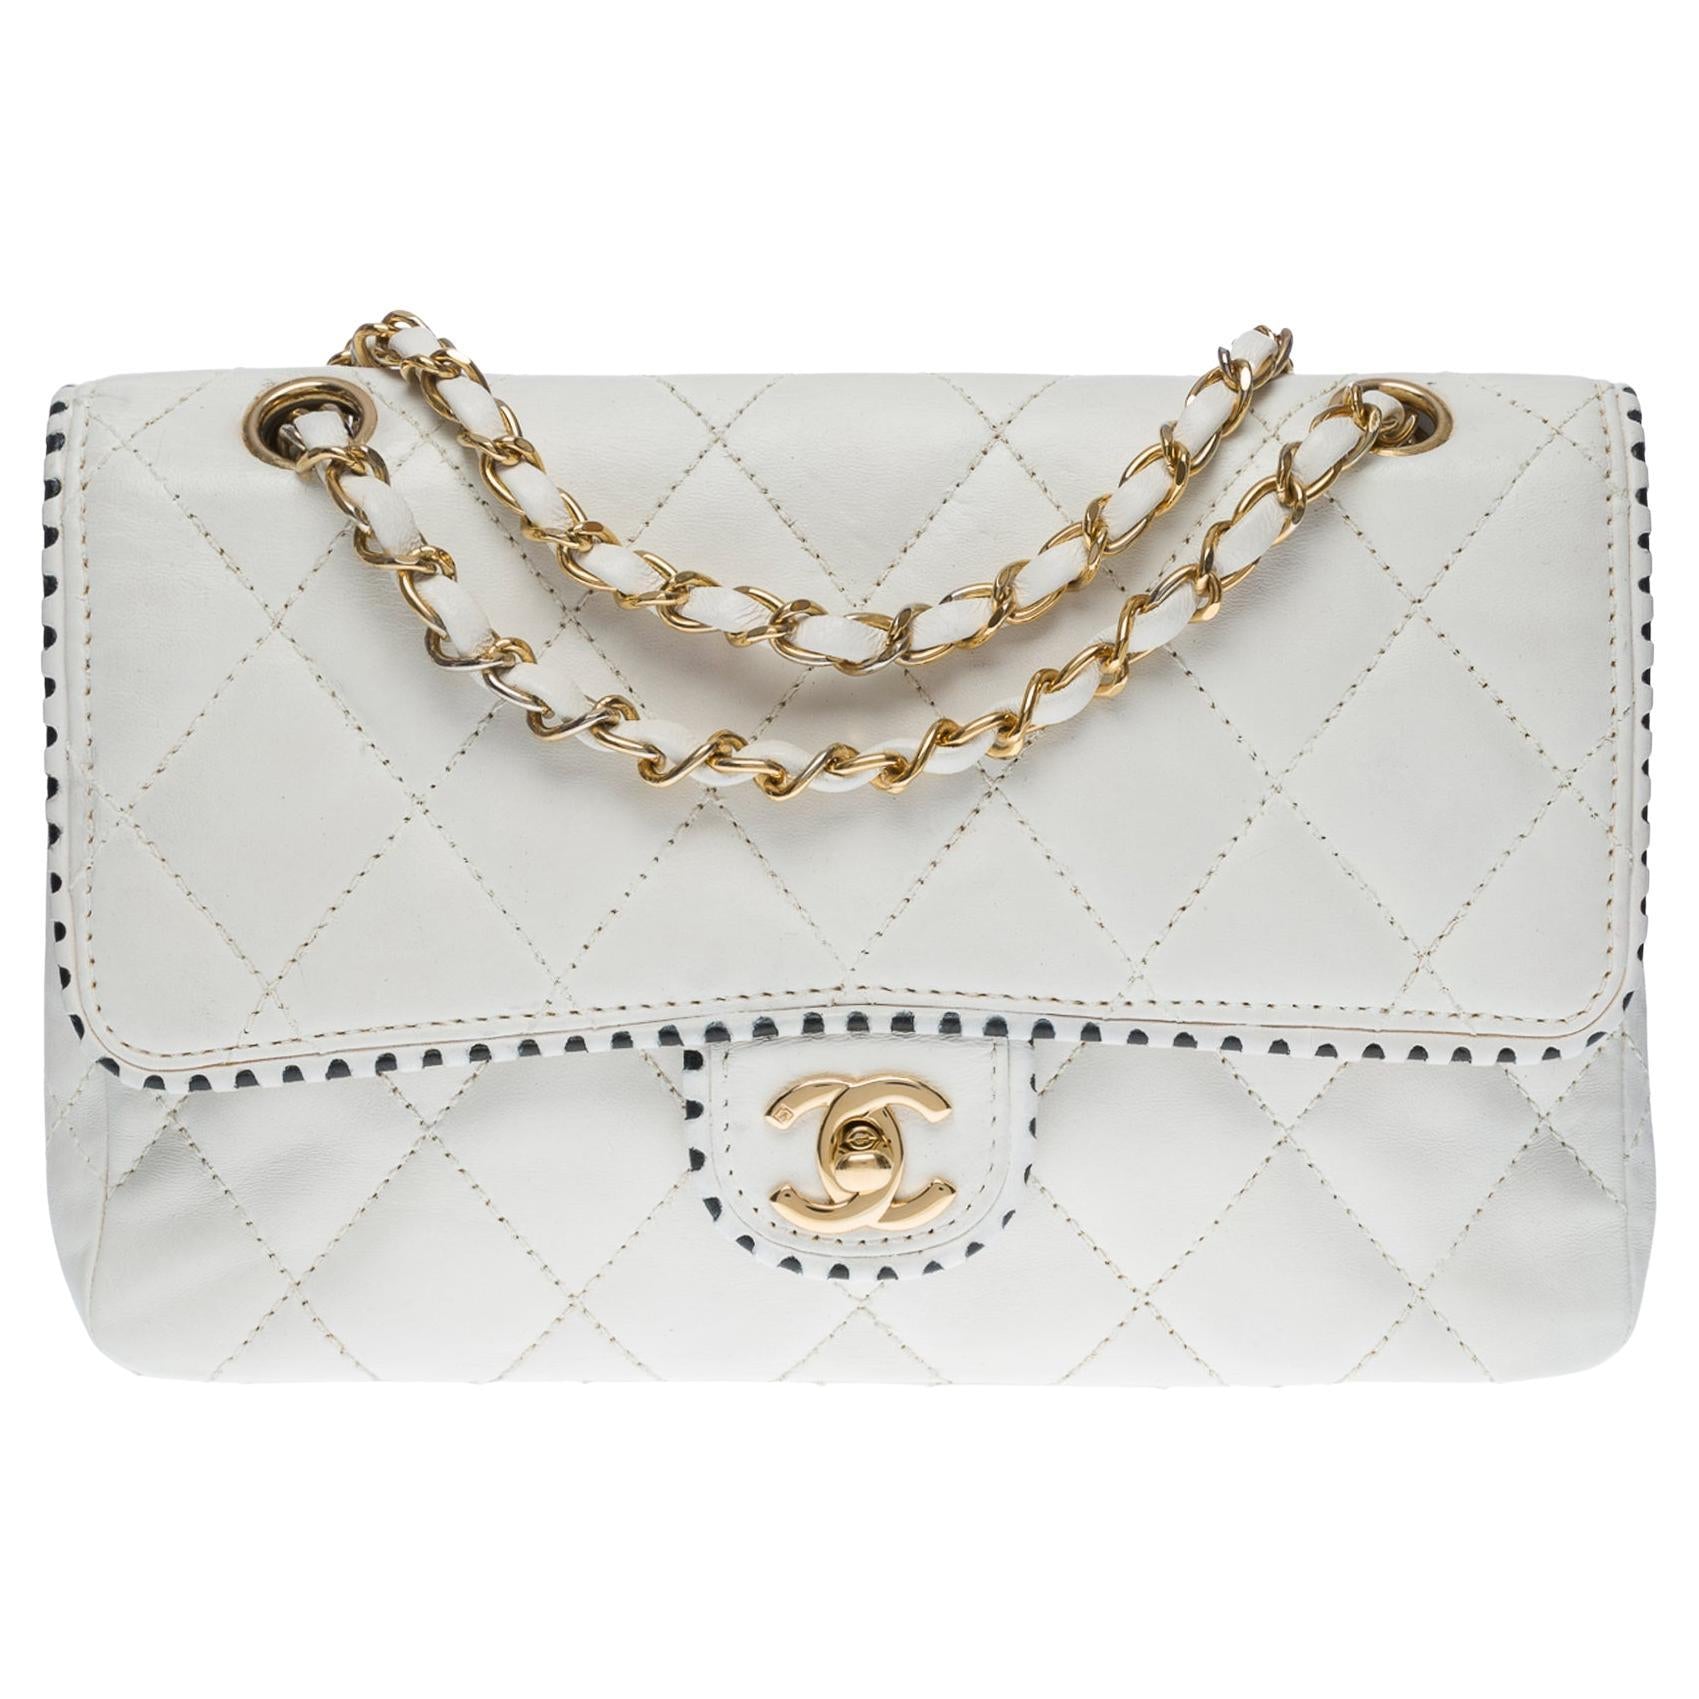 CHANEL Timeless Medium single flap shoulder bag in white quilted leath